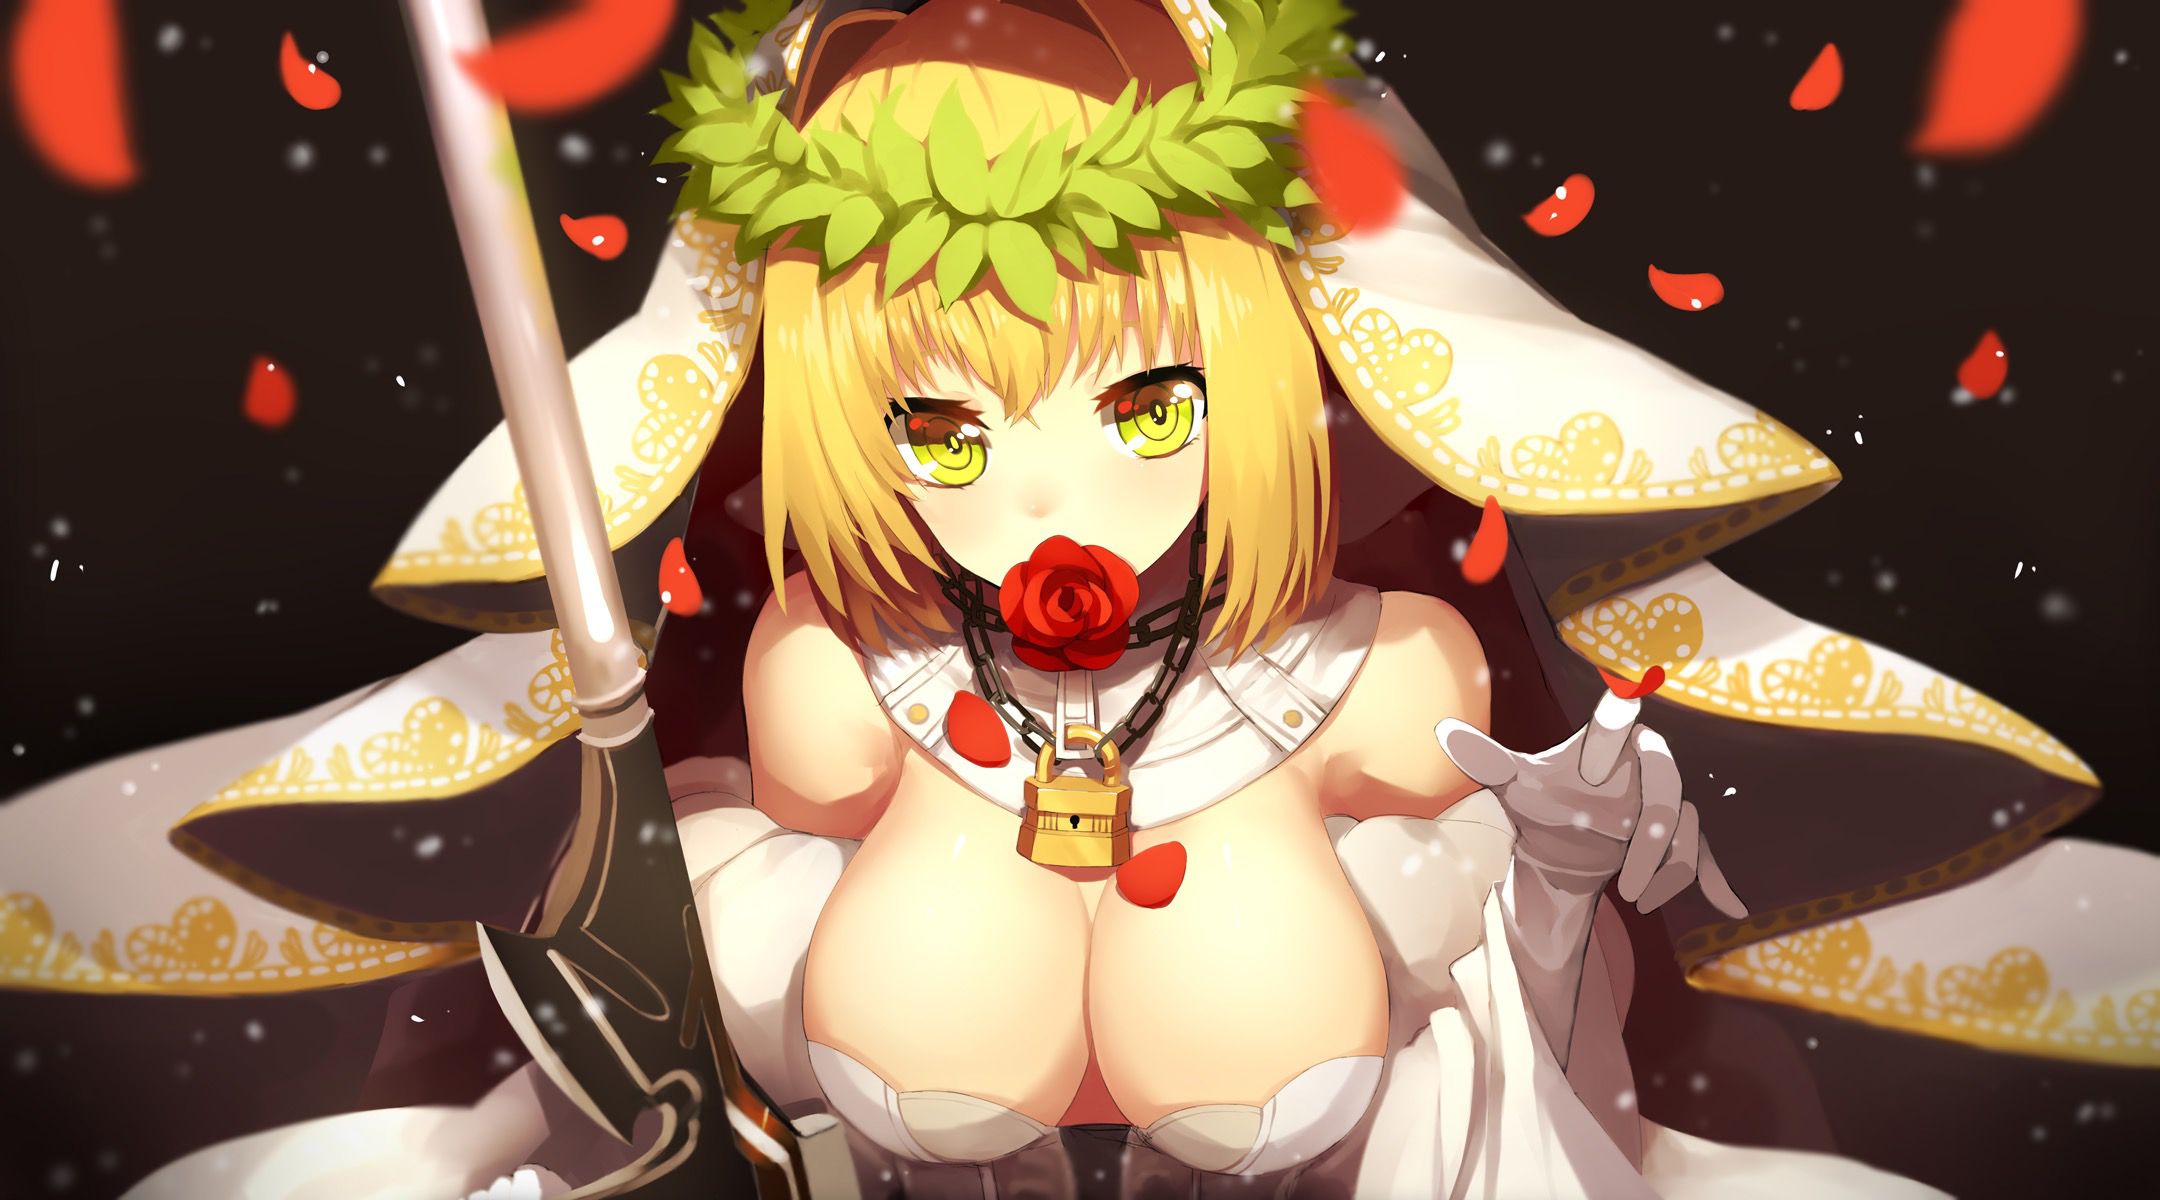 【Erotic Image】 Saber's character images that you will want to refer to in fate grand order erotic cosplay 13